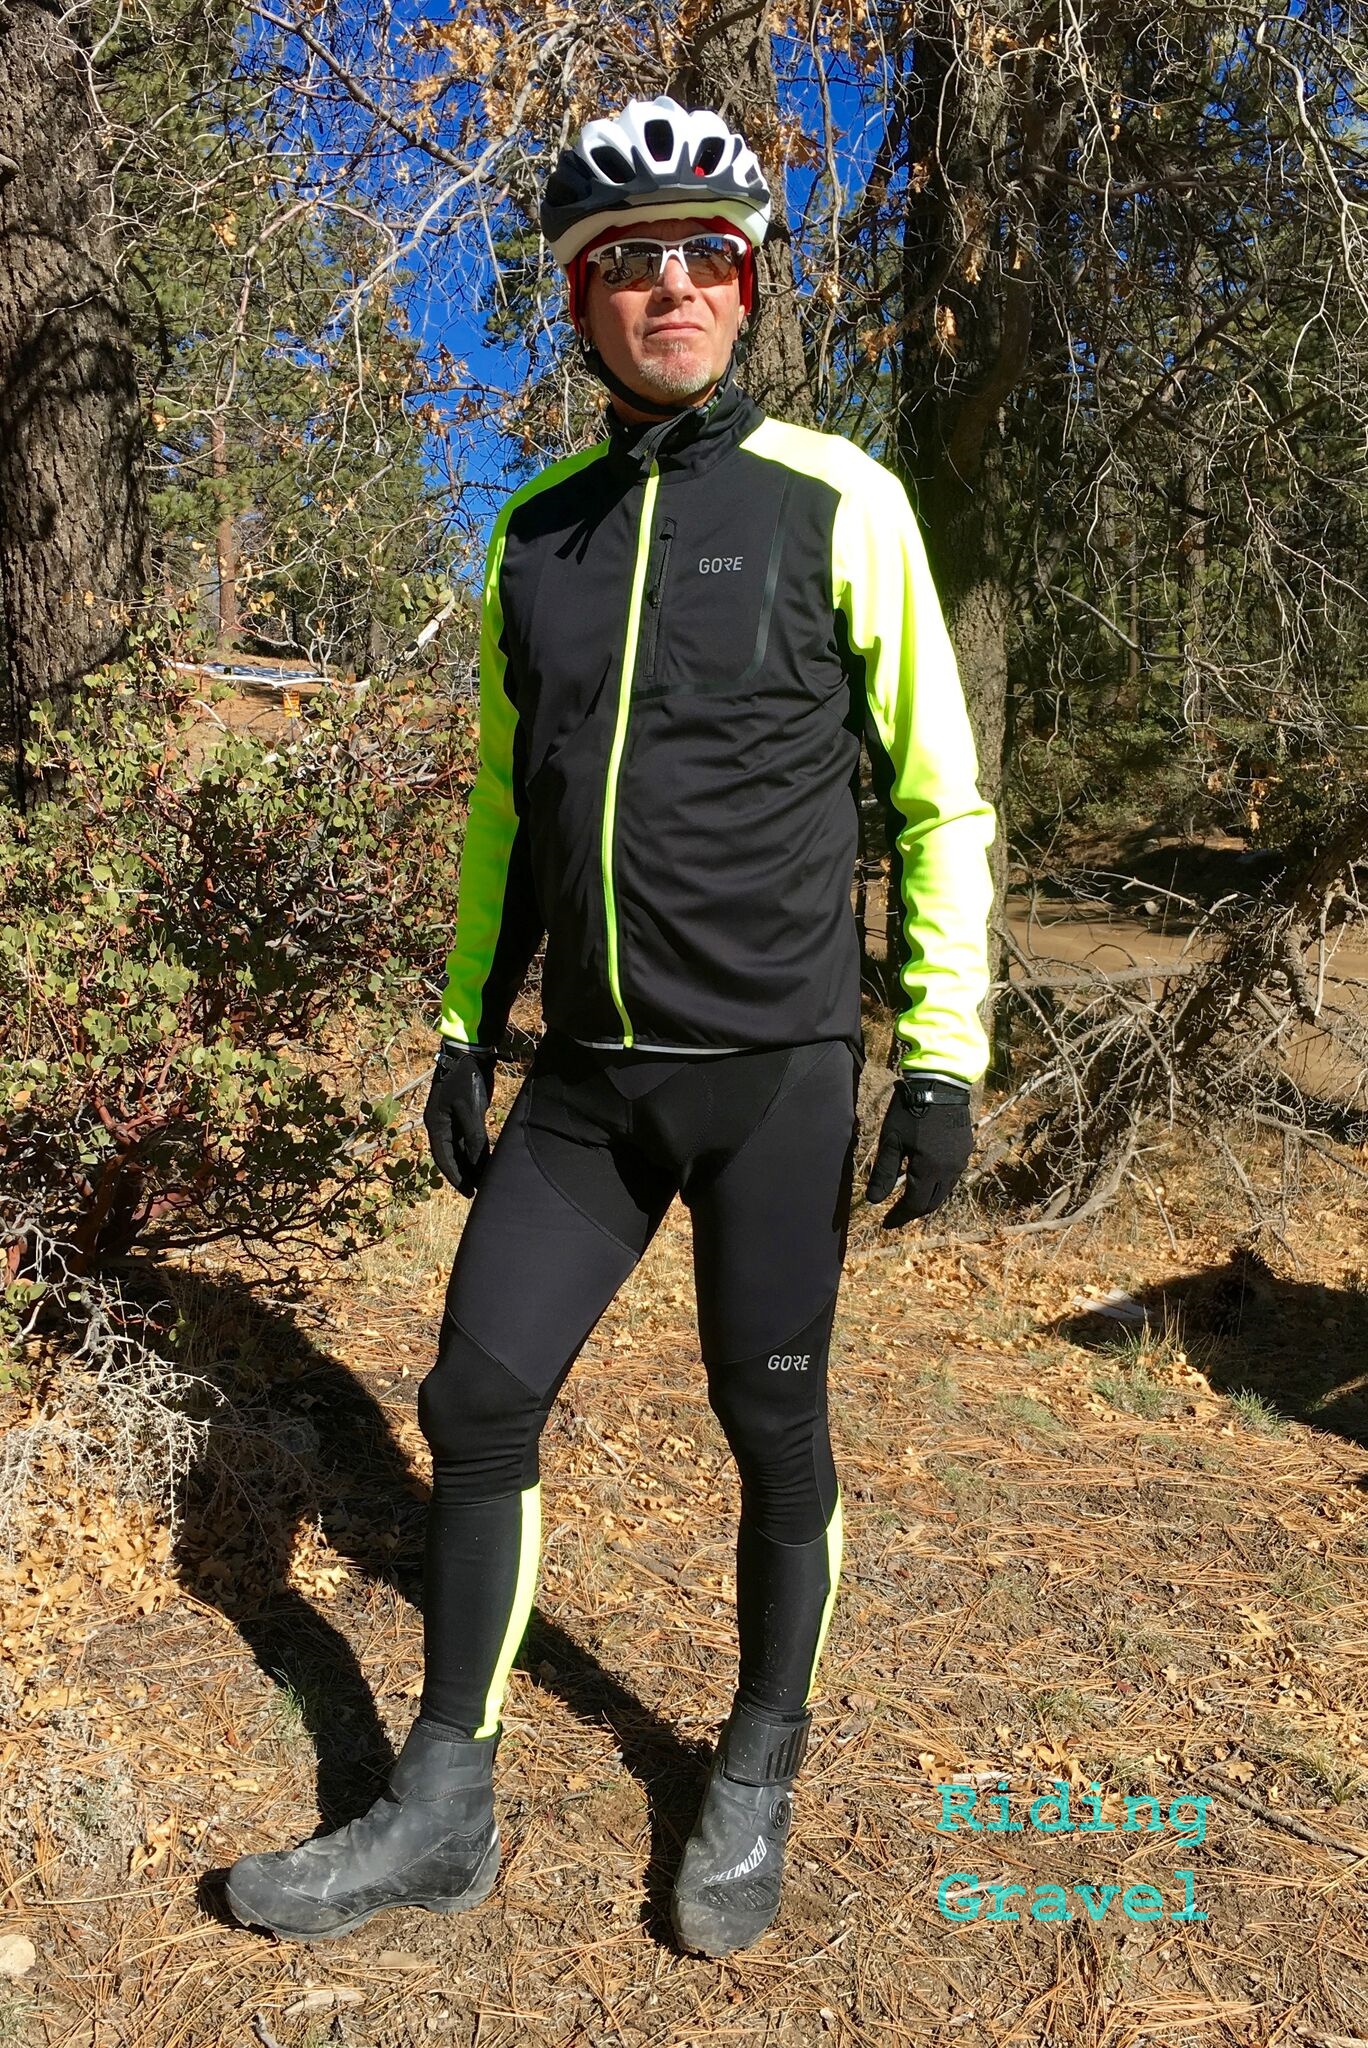 GORE Winter Clothing: Winter Wear Review - Riding Gravel